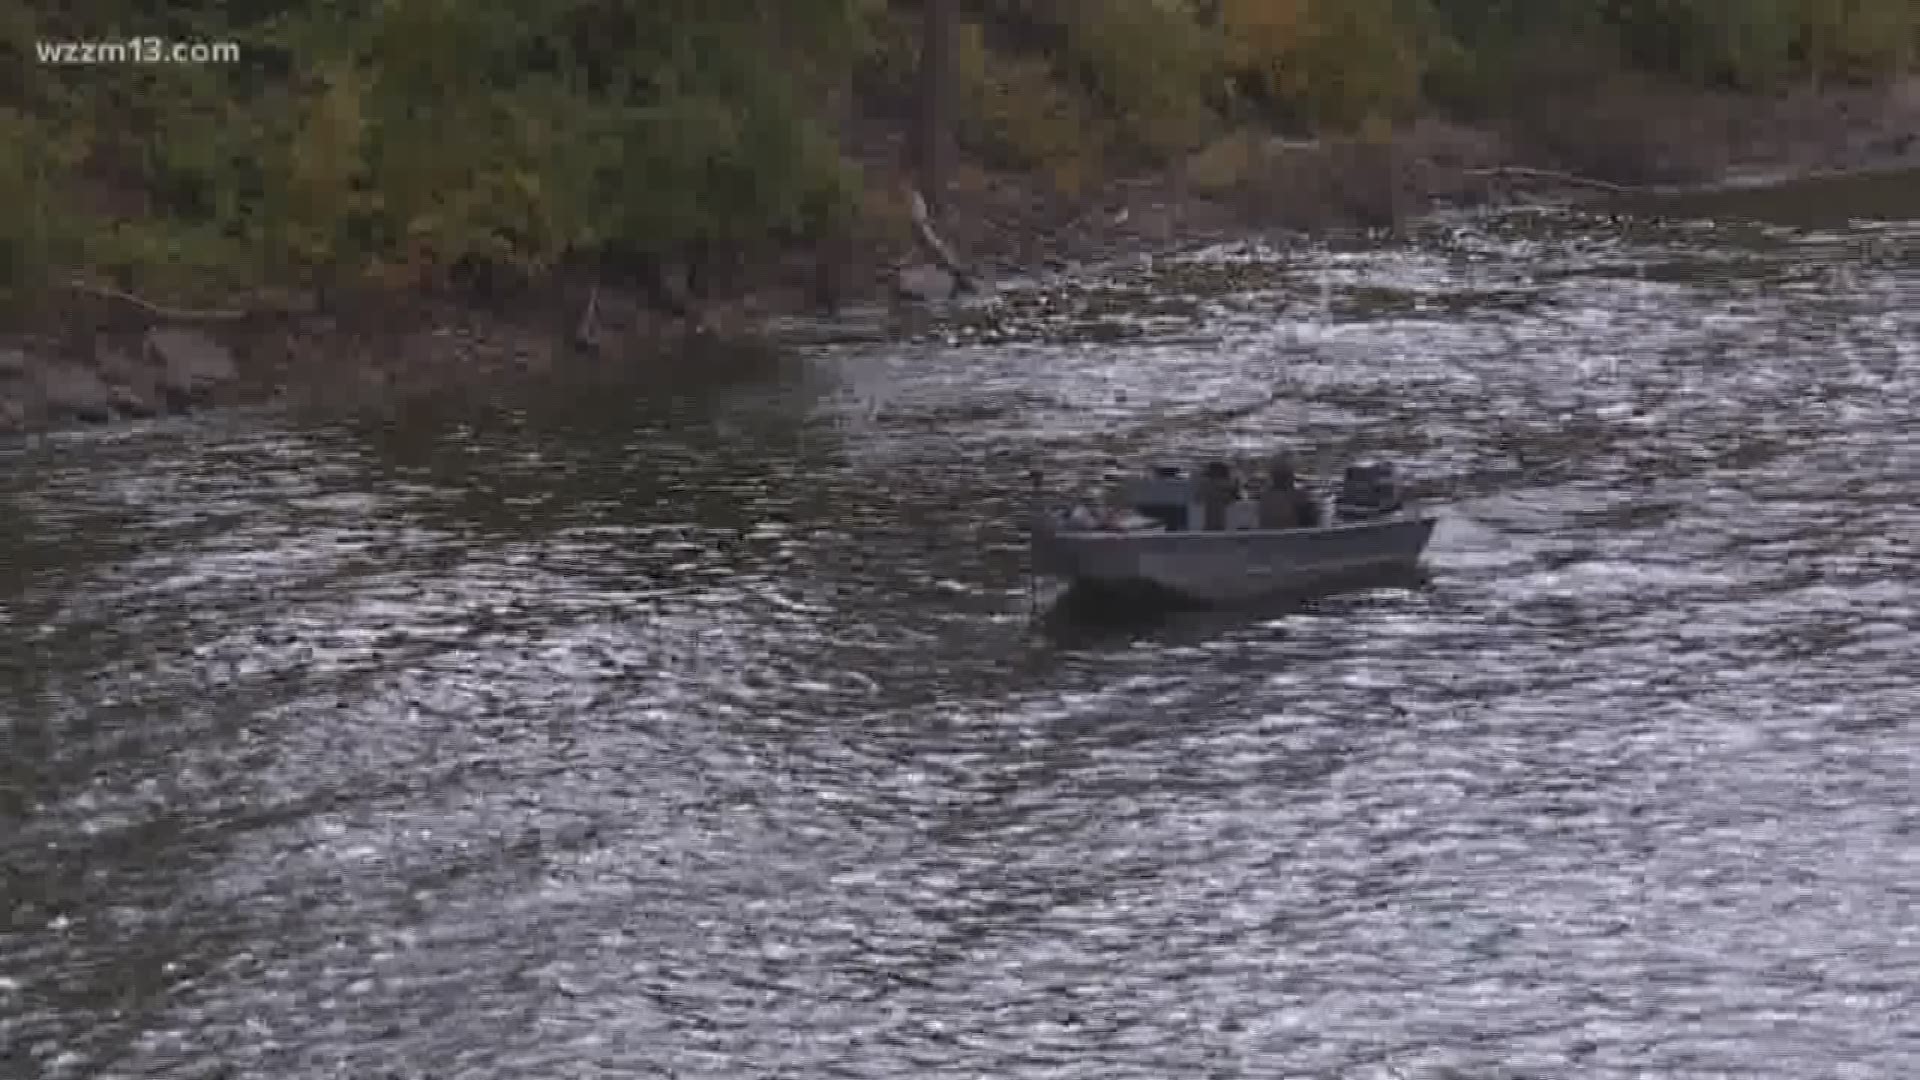 Kent County to vote on funding for restoring the rapids project